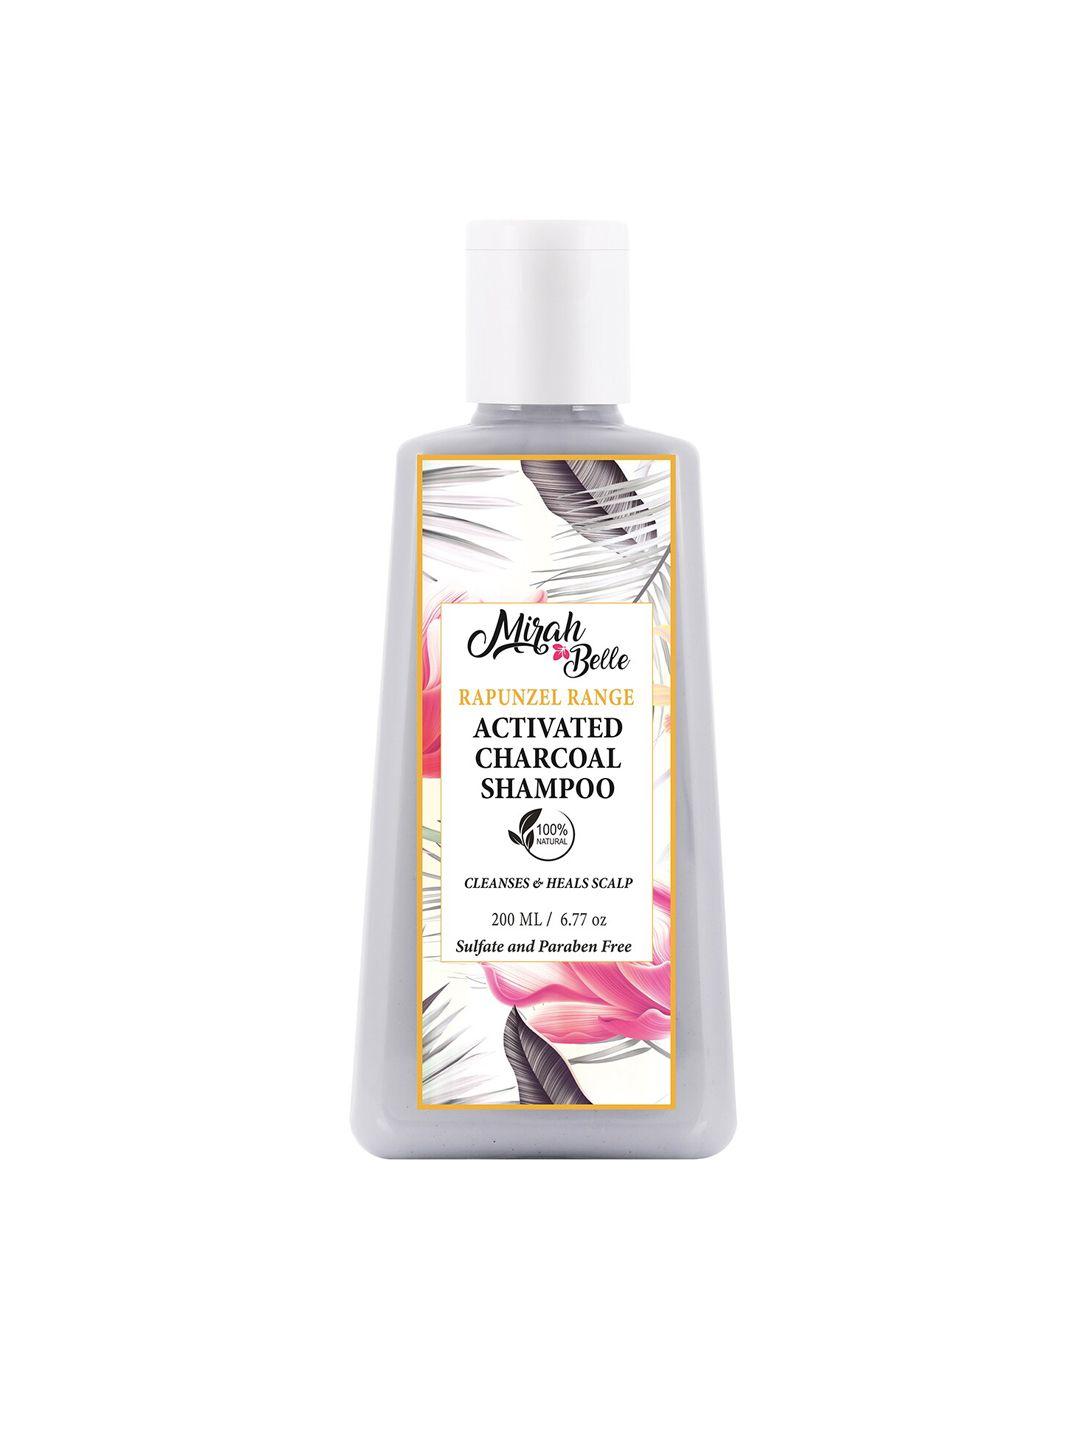 mirah belle activated charcoal shampoo 200 ml